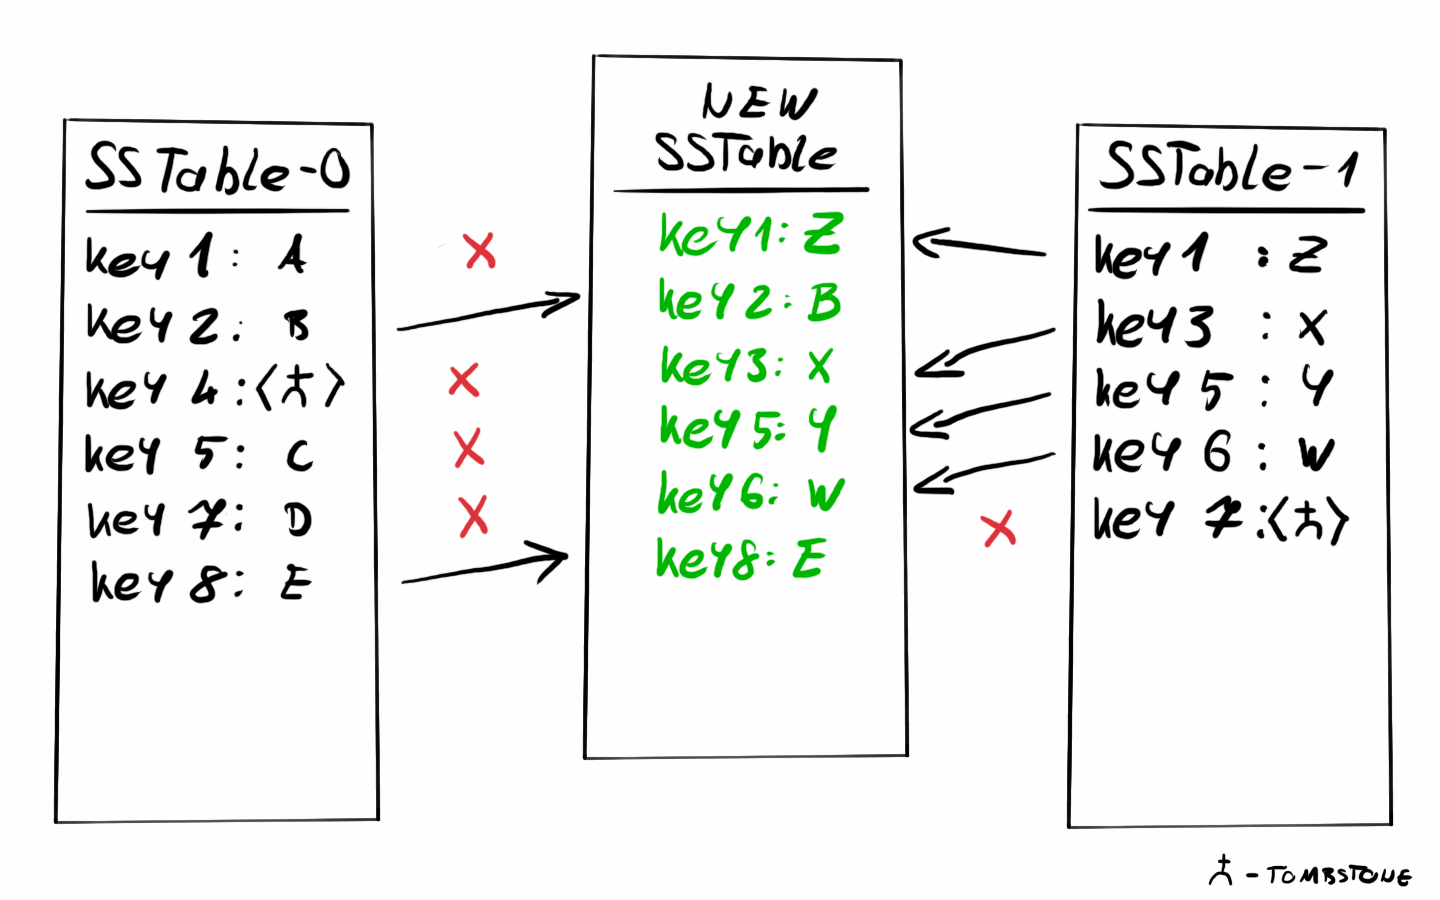 Building a Log-Structured Merge Tree Database - Part 1